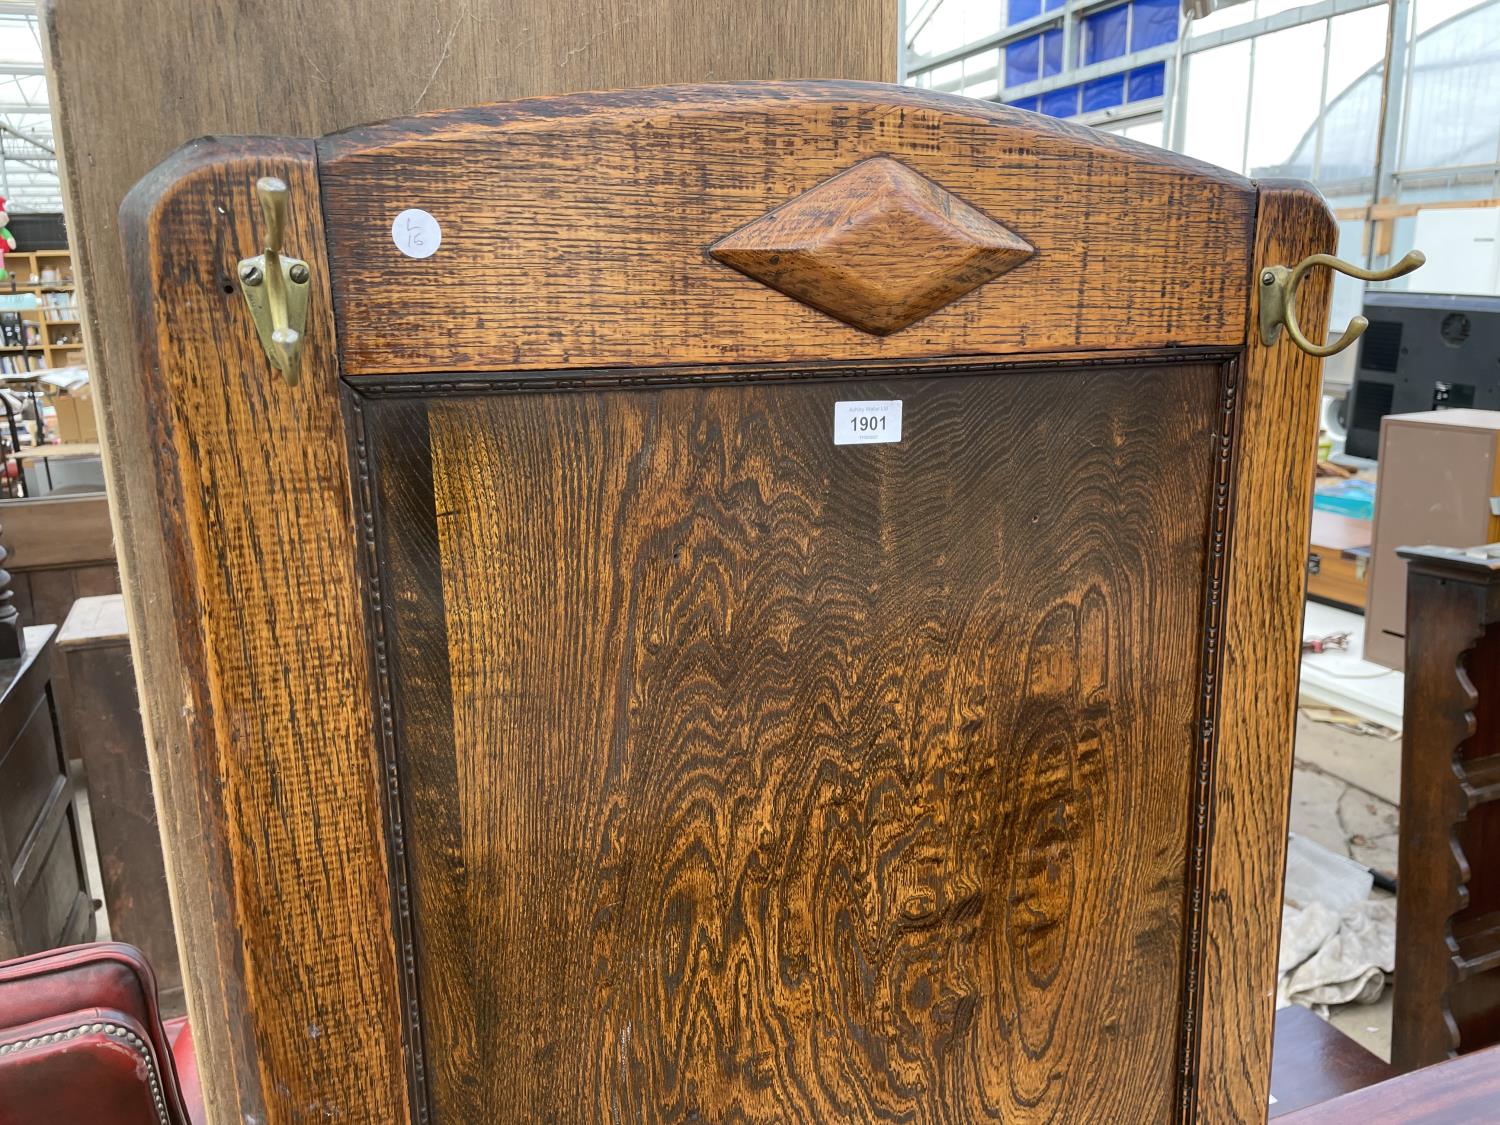 AN EARLY 20TH CENTURY OAK HALL COAT/STICK STAND WITH ART NOUVEAU STYLE PIERCED FRONT PANEL, 25" WIDE - Image 2 of 6